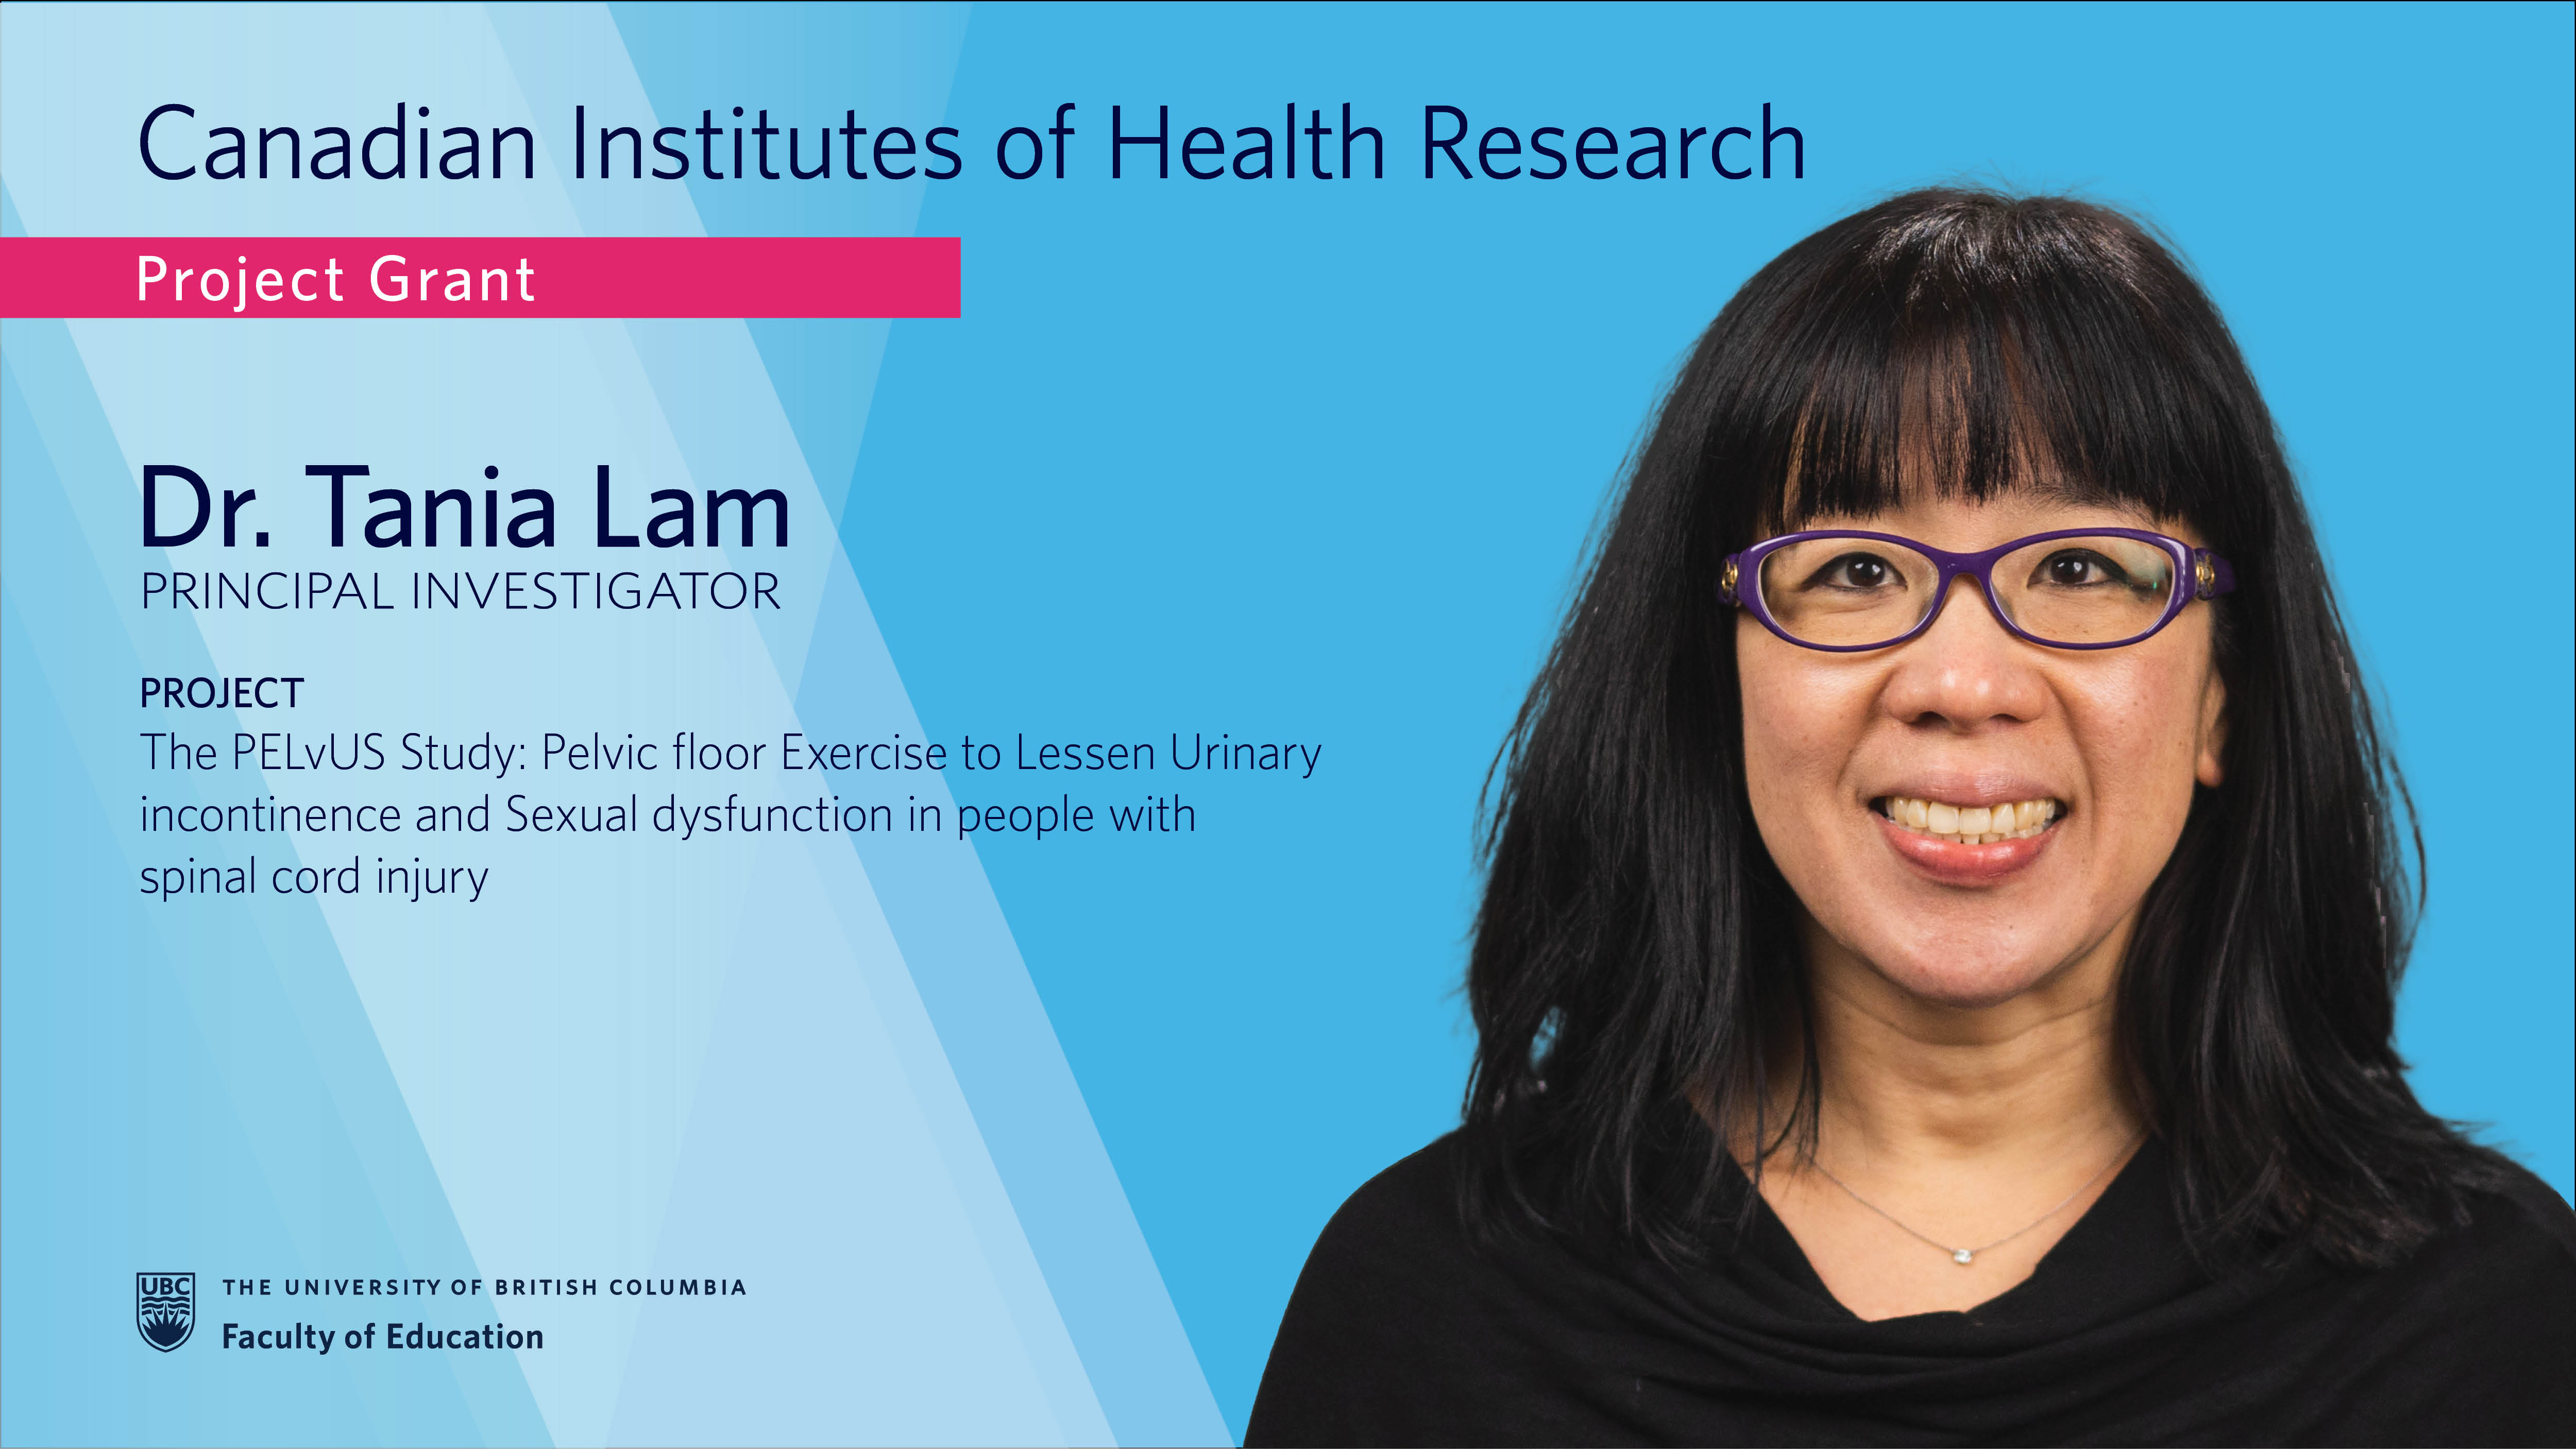 Dr. Tania Lam and team receive CIHR Project Grant to investigate pelvic floor muscle exercises in people with spinal cord injury